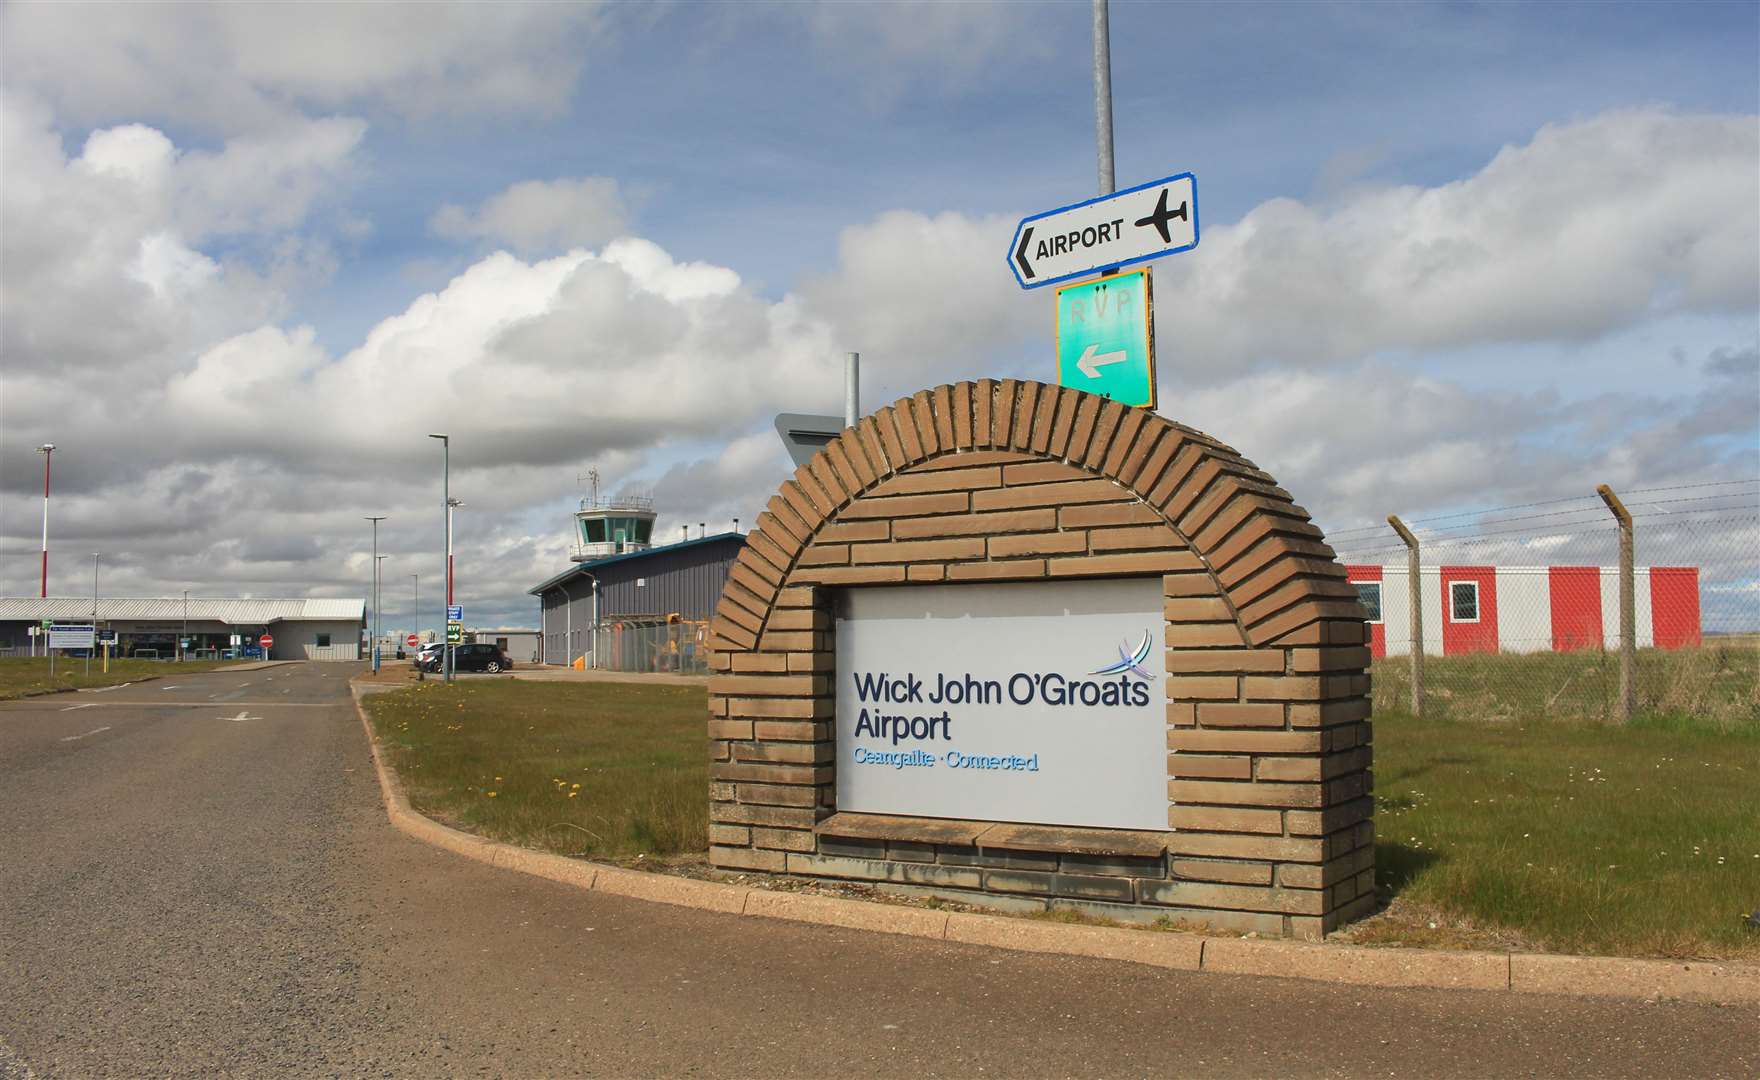 'Helpful' talks have taken place on funding for services to and from Wick John O’Groats Airport.